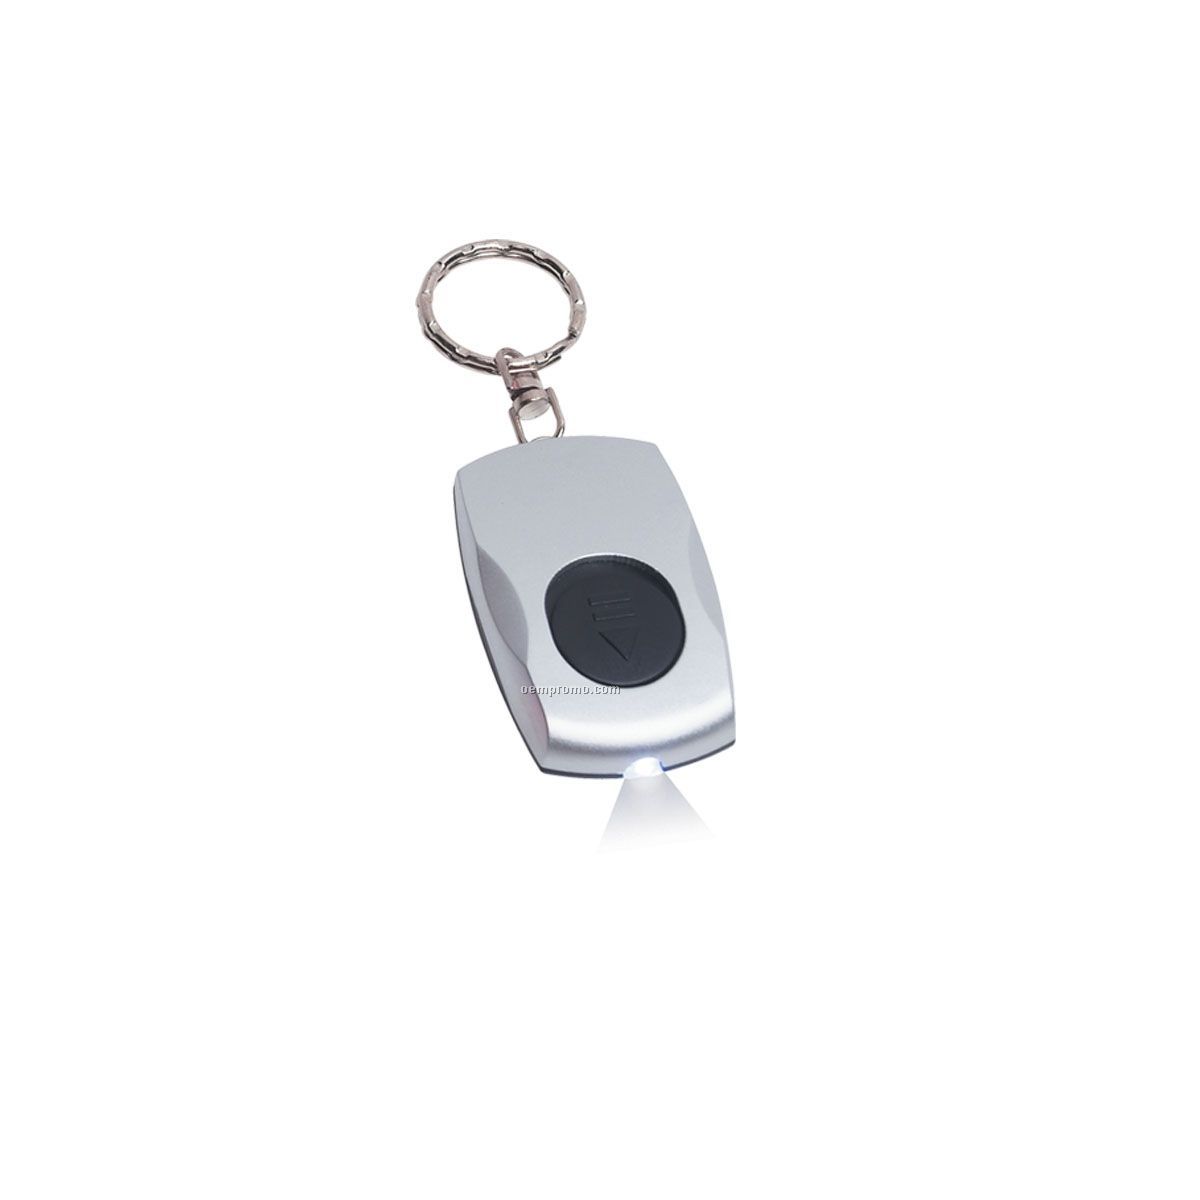 Light Up Keychain - Silver W/ Black Accents & White LED